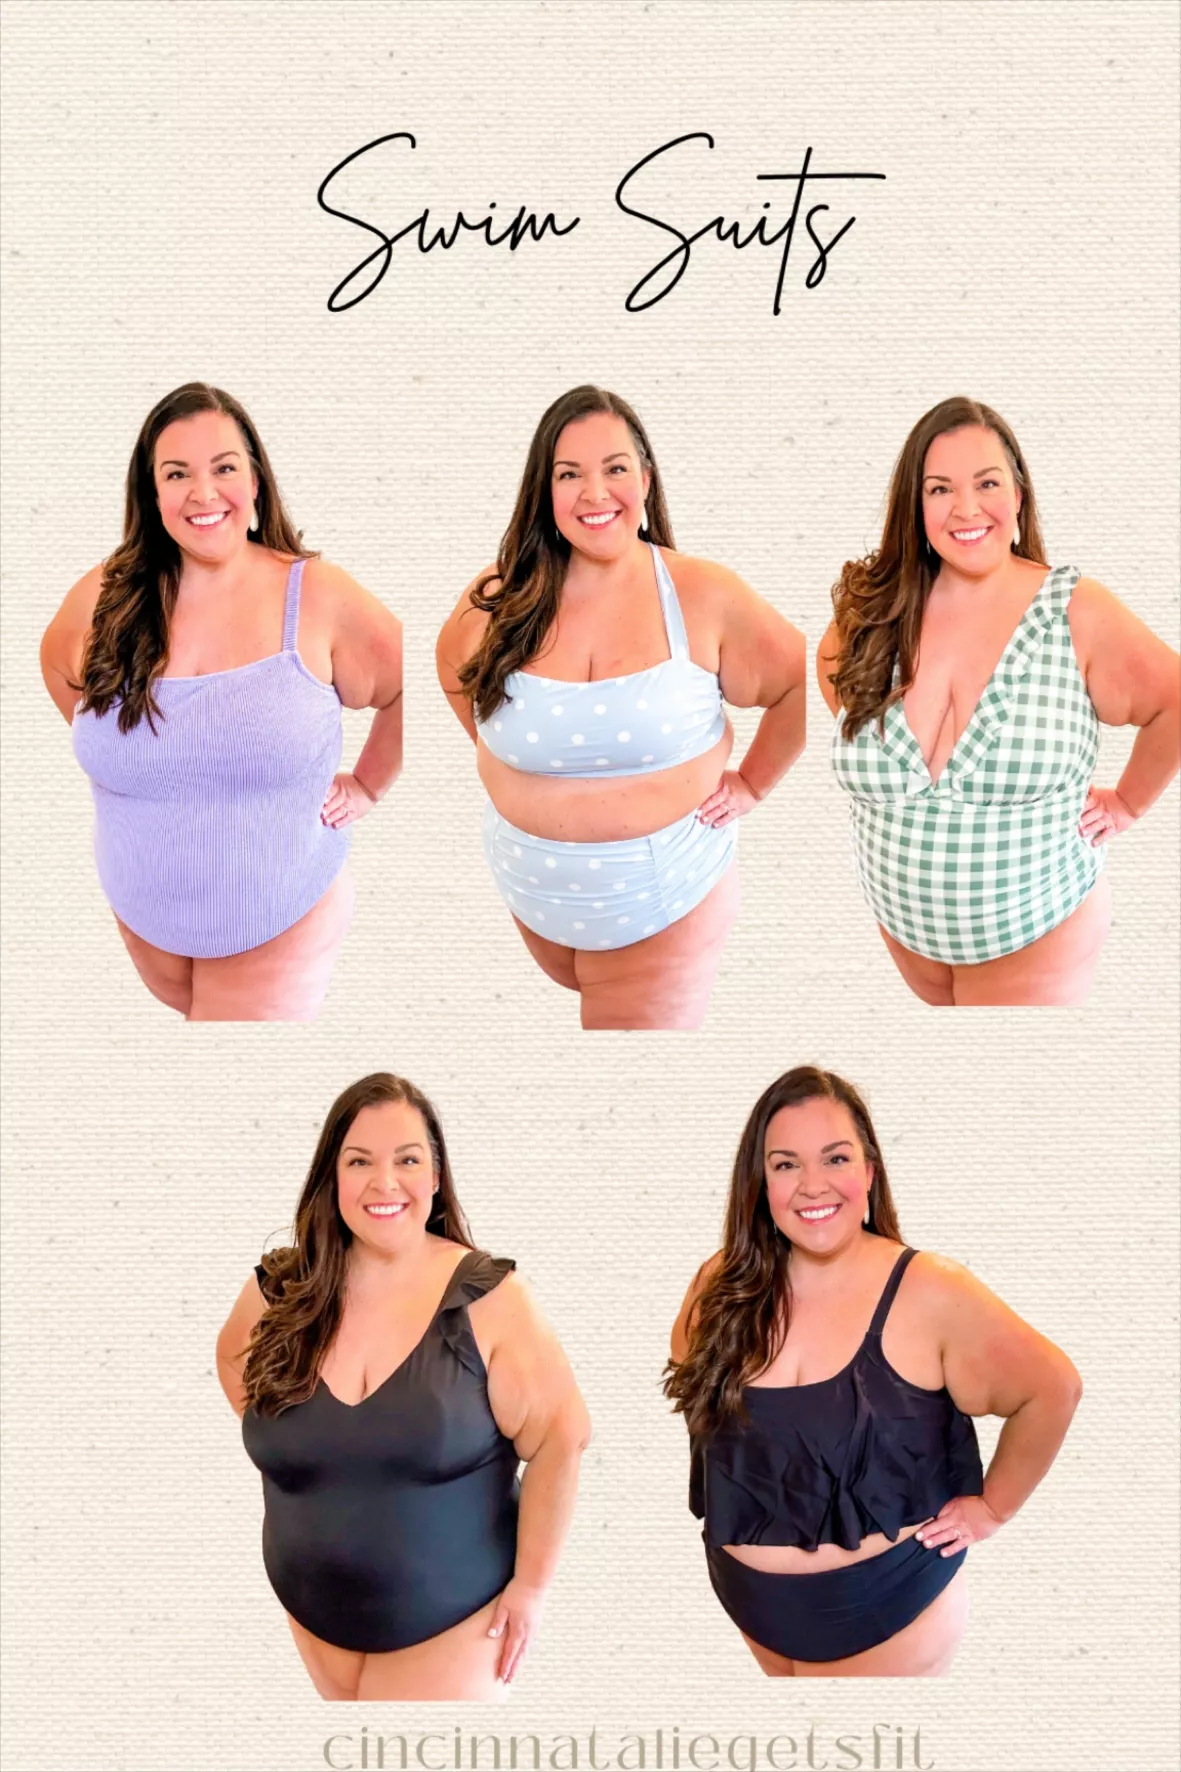 Time and Tru Striped Ruched Maternity Tank  Maternity tank, Light pink  shirt, Plus size pregnancy